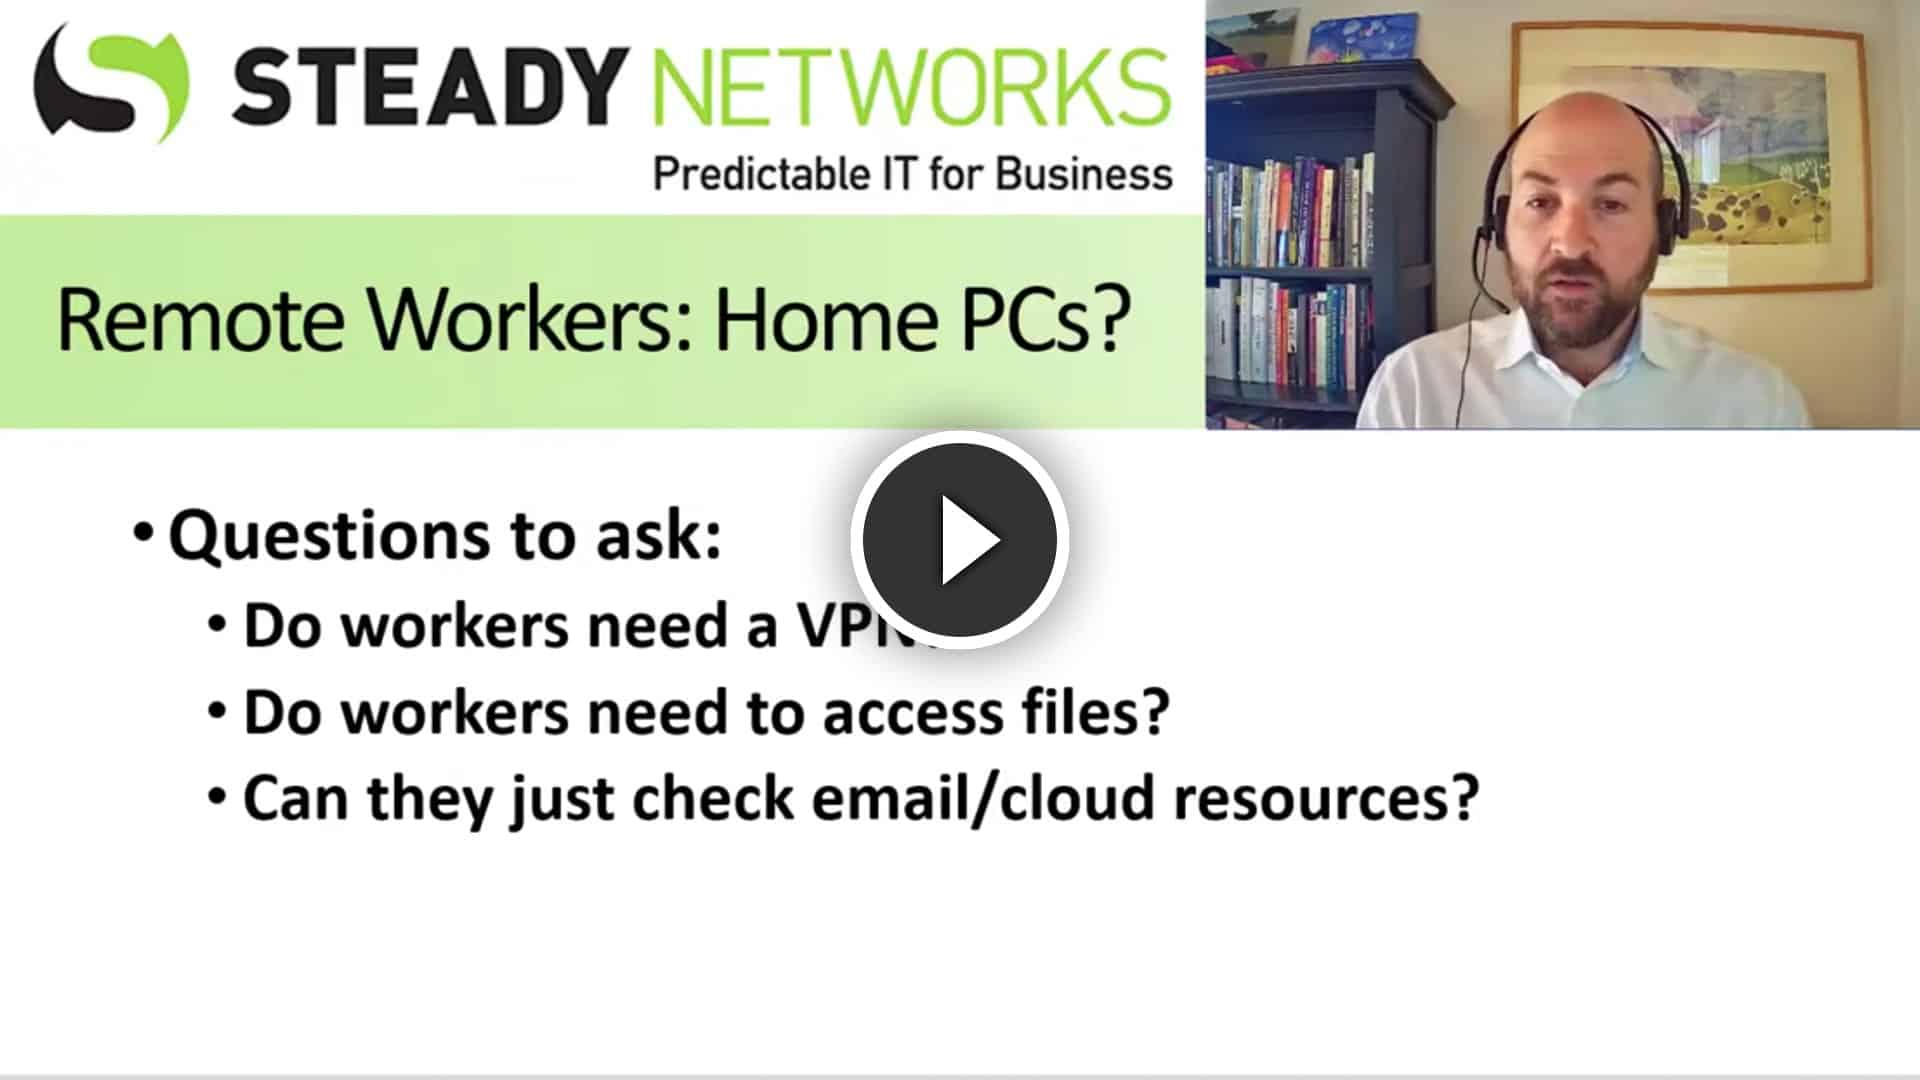 Should you allow workers to use home PCs?